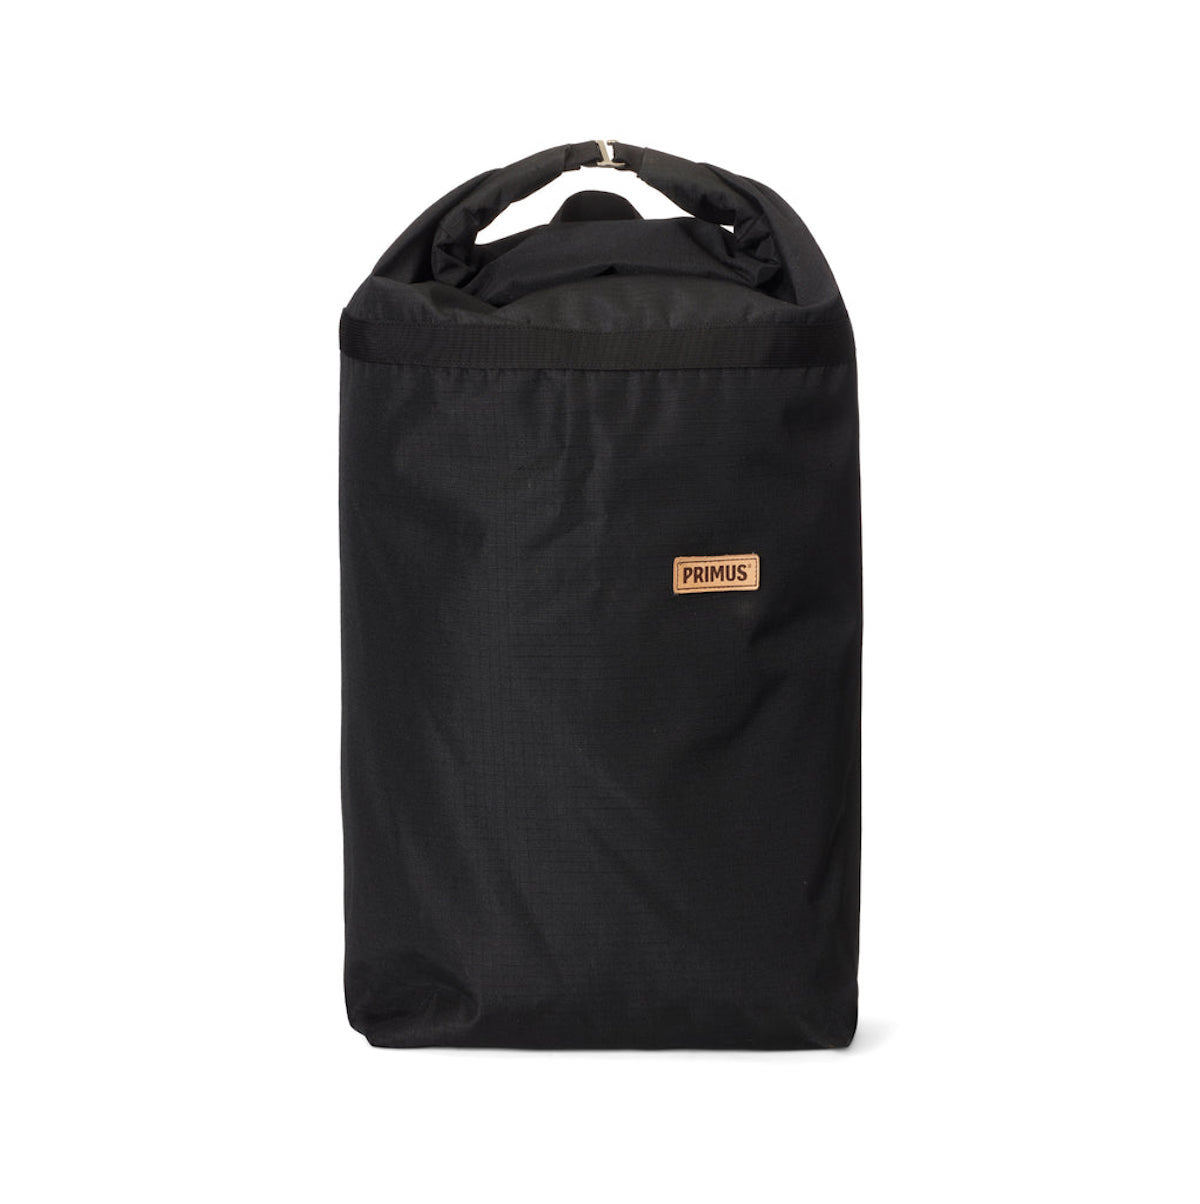 Primus Kuchoma Grille CarryBag